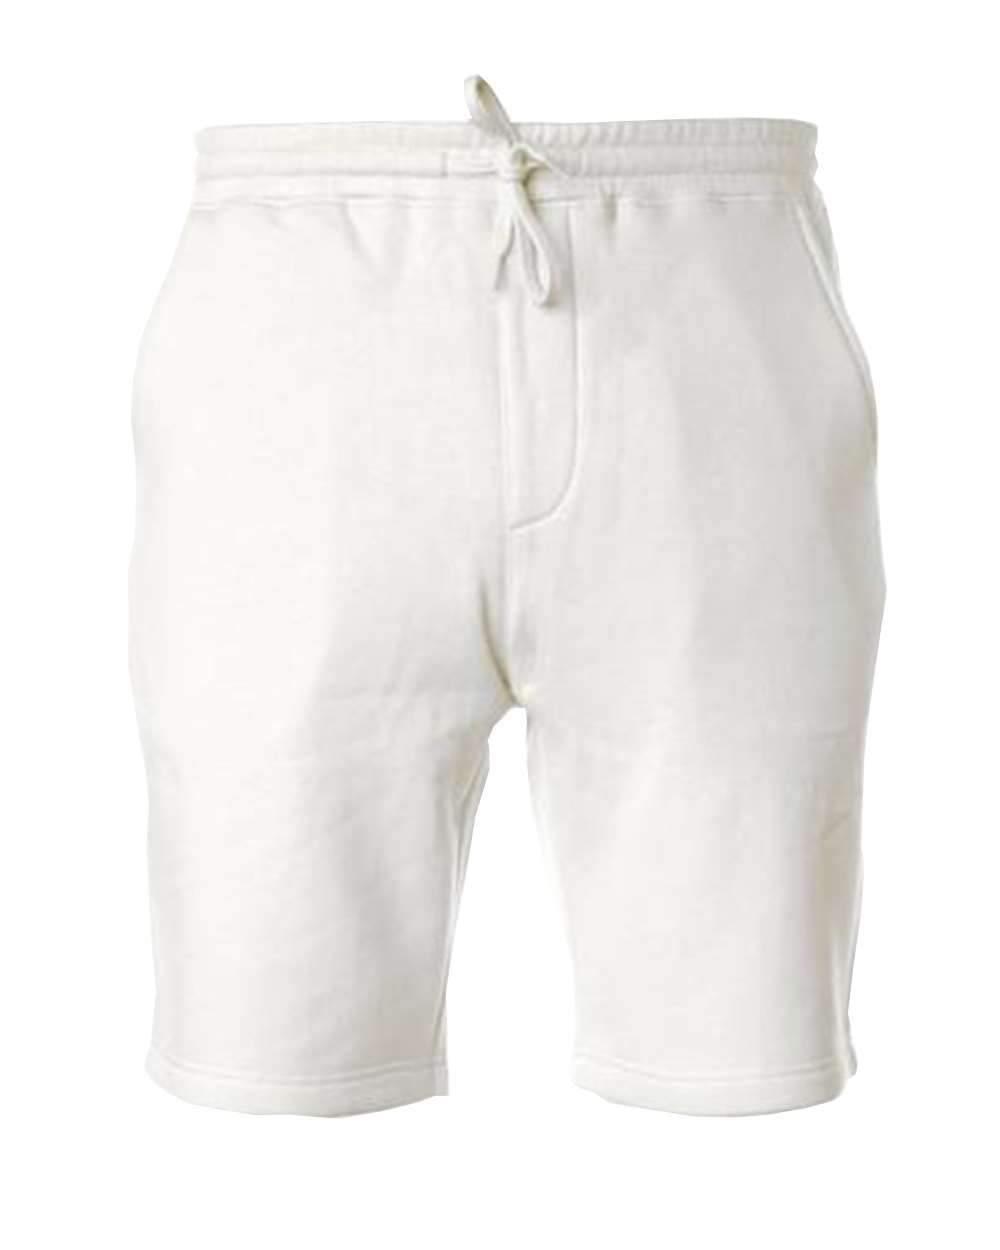 Blank Pigment Dyed Fleece Shorts - Constantly Create Shop